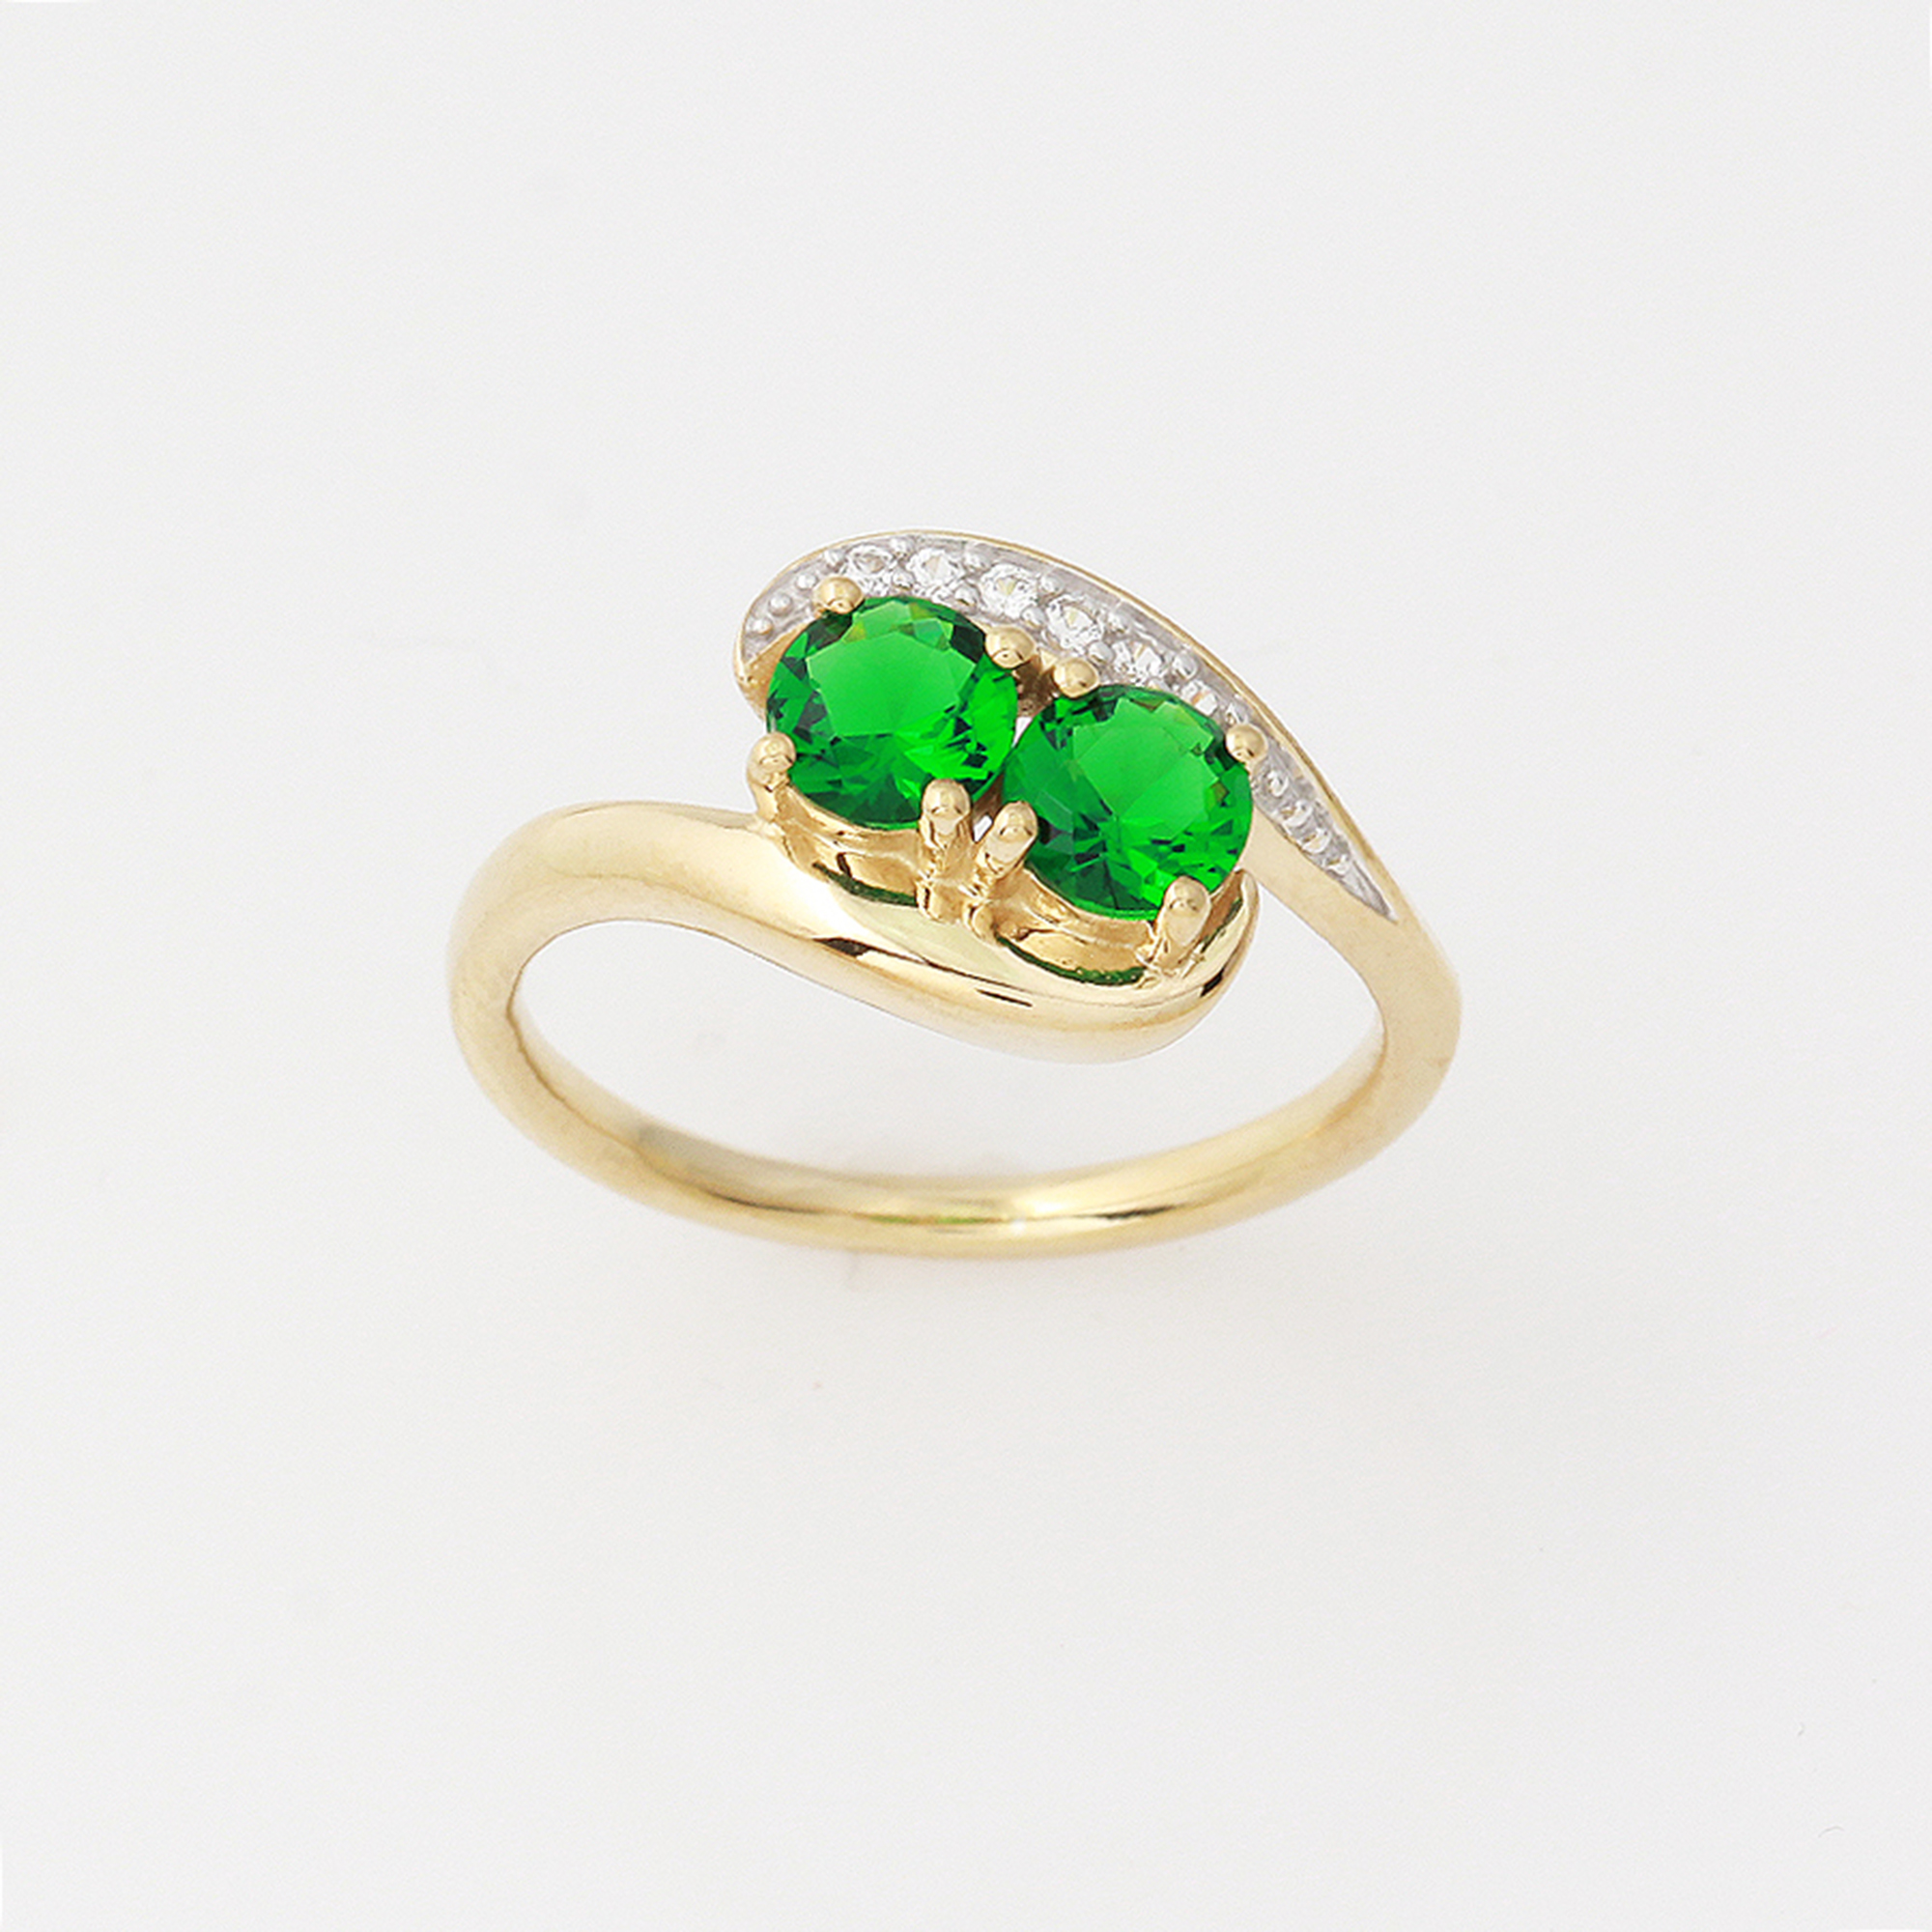 Gold Over Silver Two Stone Simulated Emerald Ring - Size 7 Only